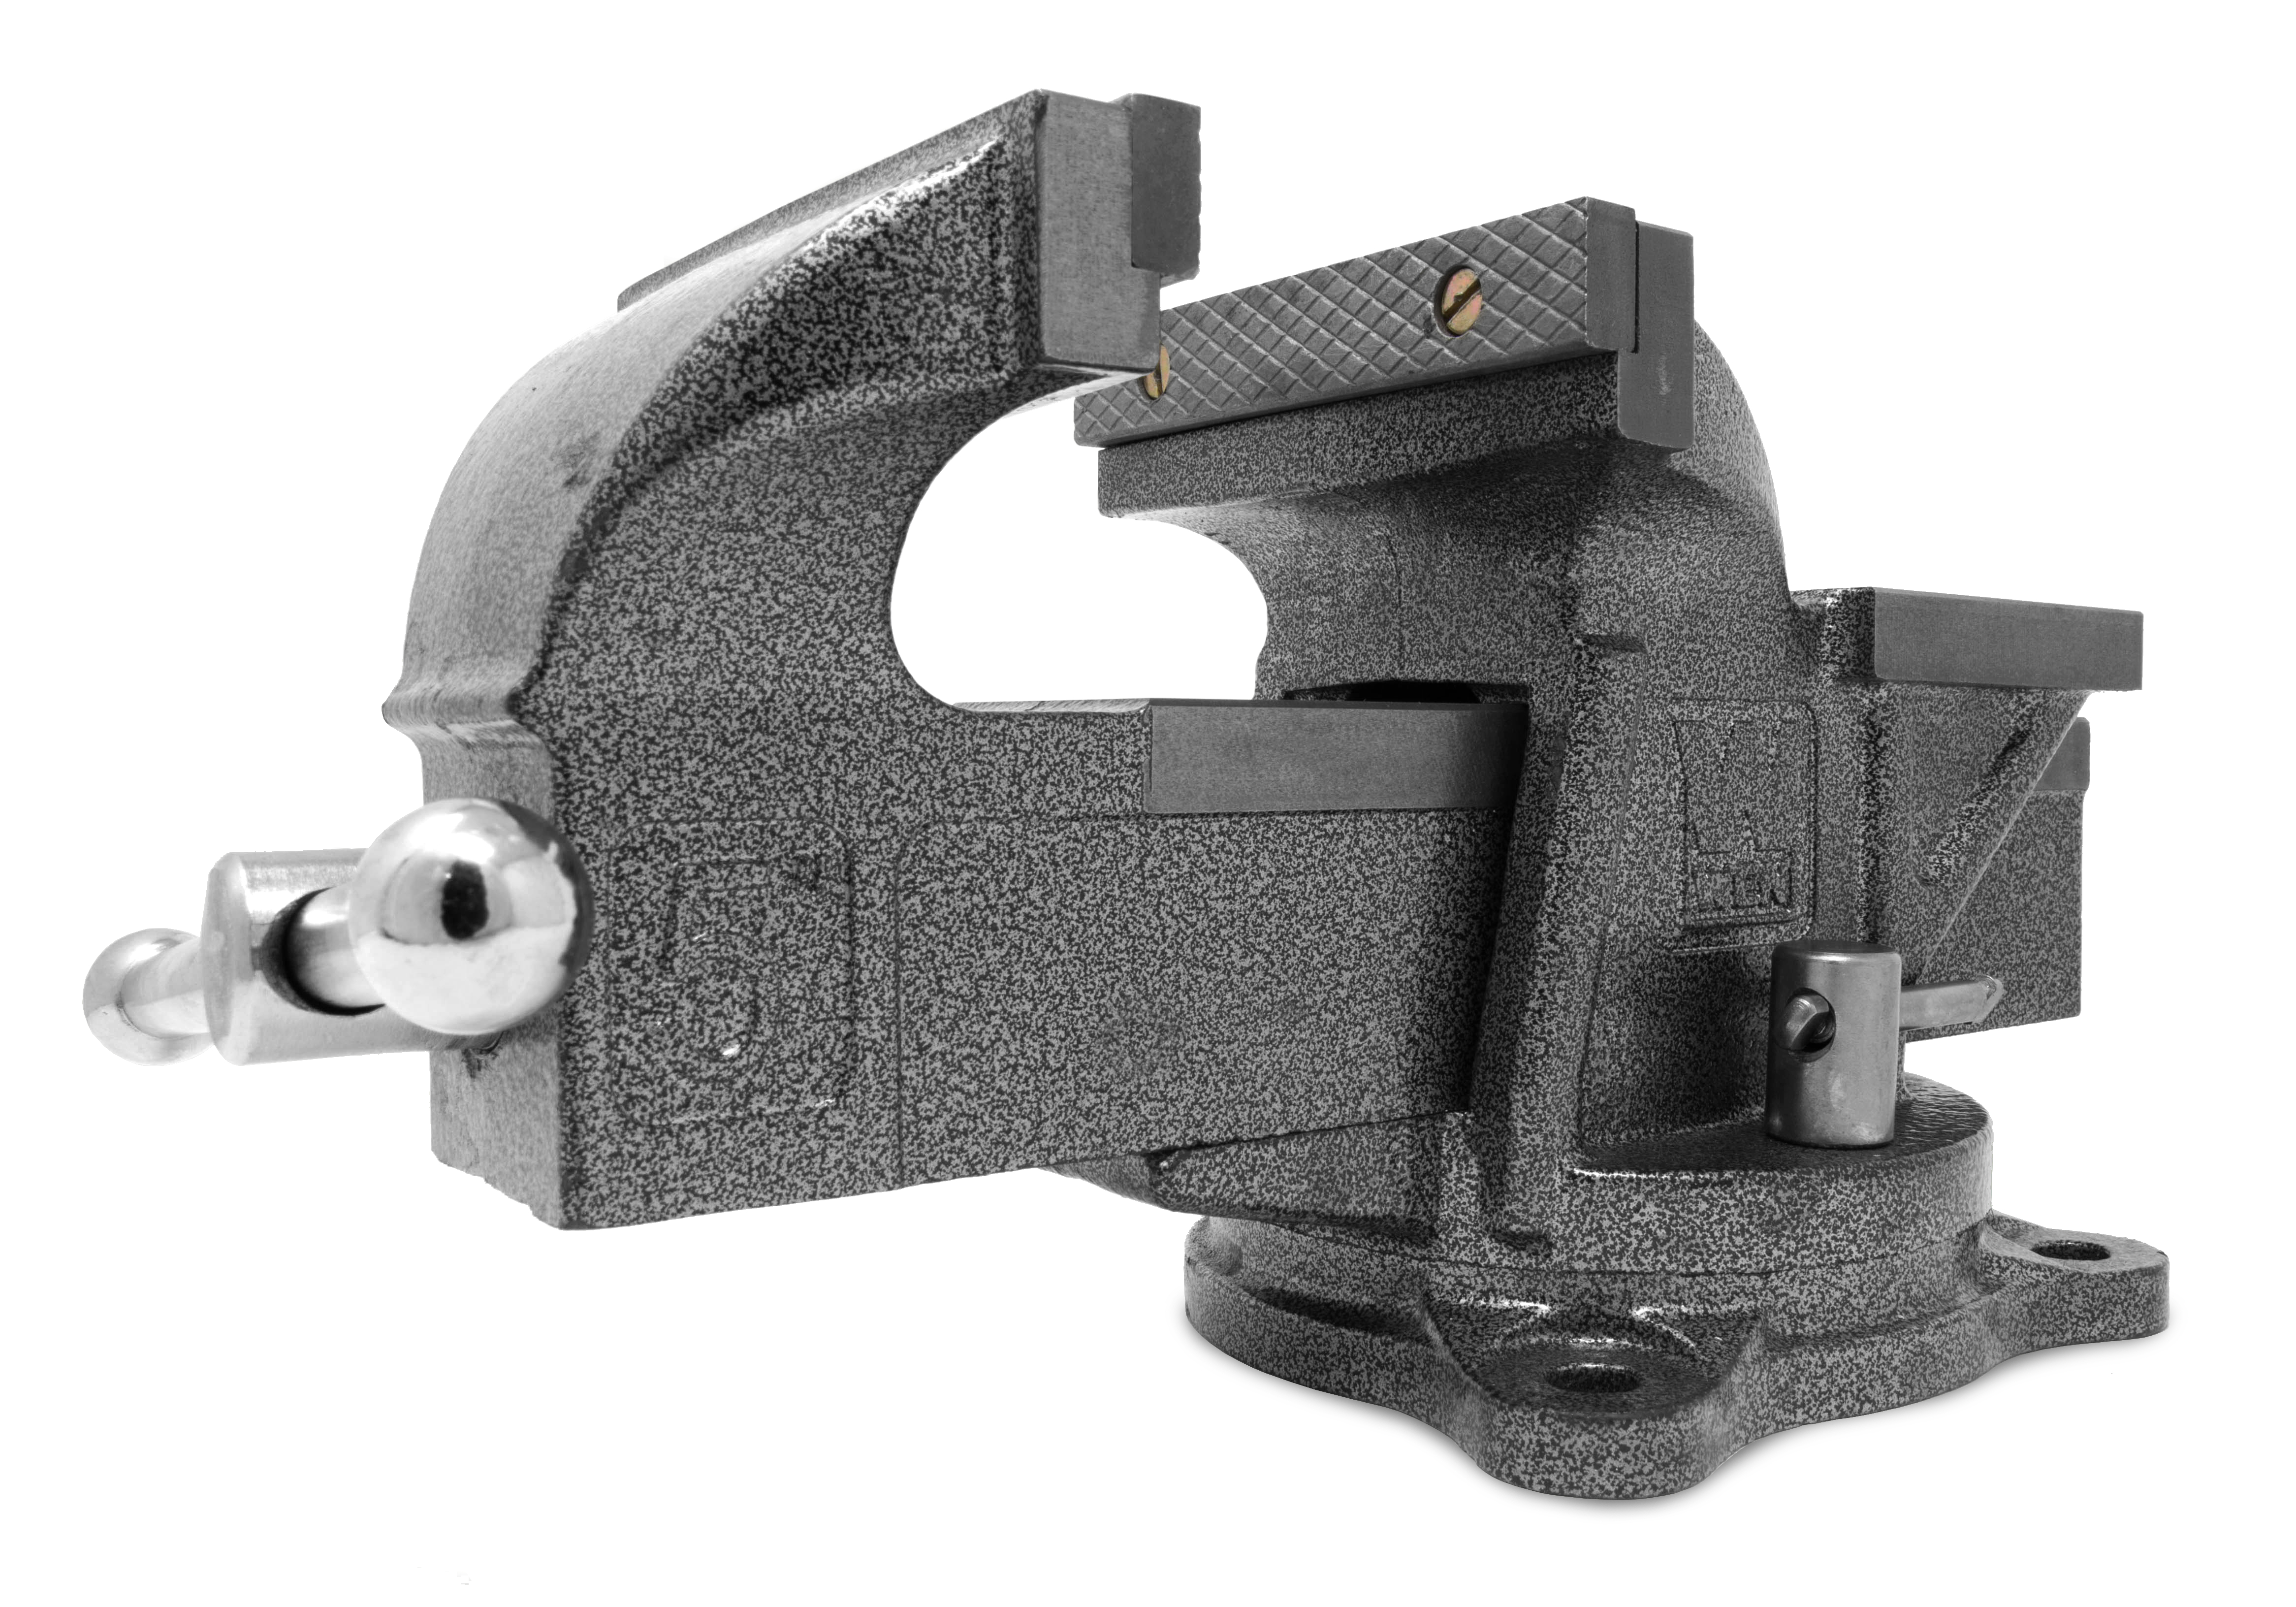 WEN Products 5-Inch Heavy Duty Cast Iron Bench Vise with Swivel Base - image 1 of 4